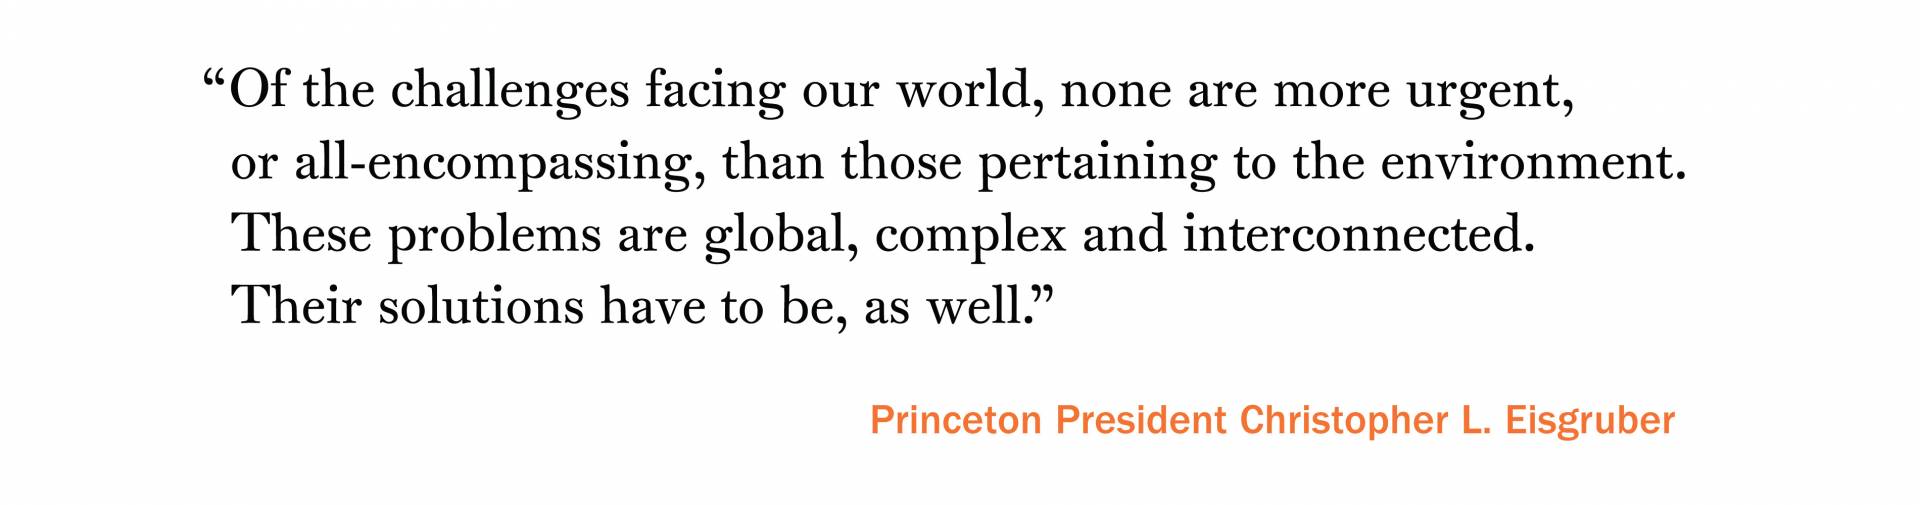 “Of the challenges facing our world, none are more urgent, or all-encompassing, than those pertaining to the environment. These problems are global, complex and interconnected. Their solutions have to be, as well.” –Princeton President Christopher L. Eisgruber